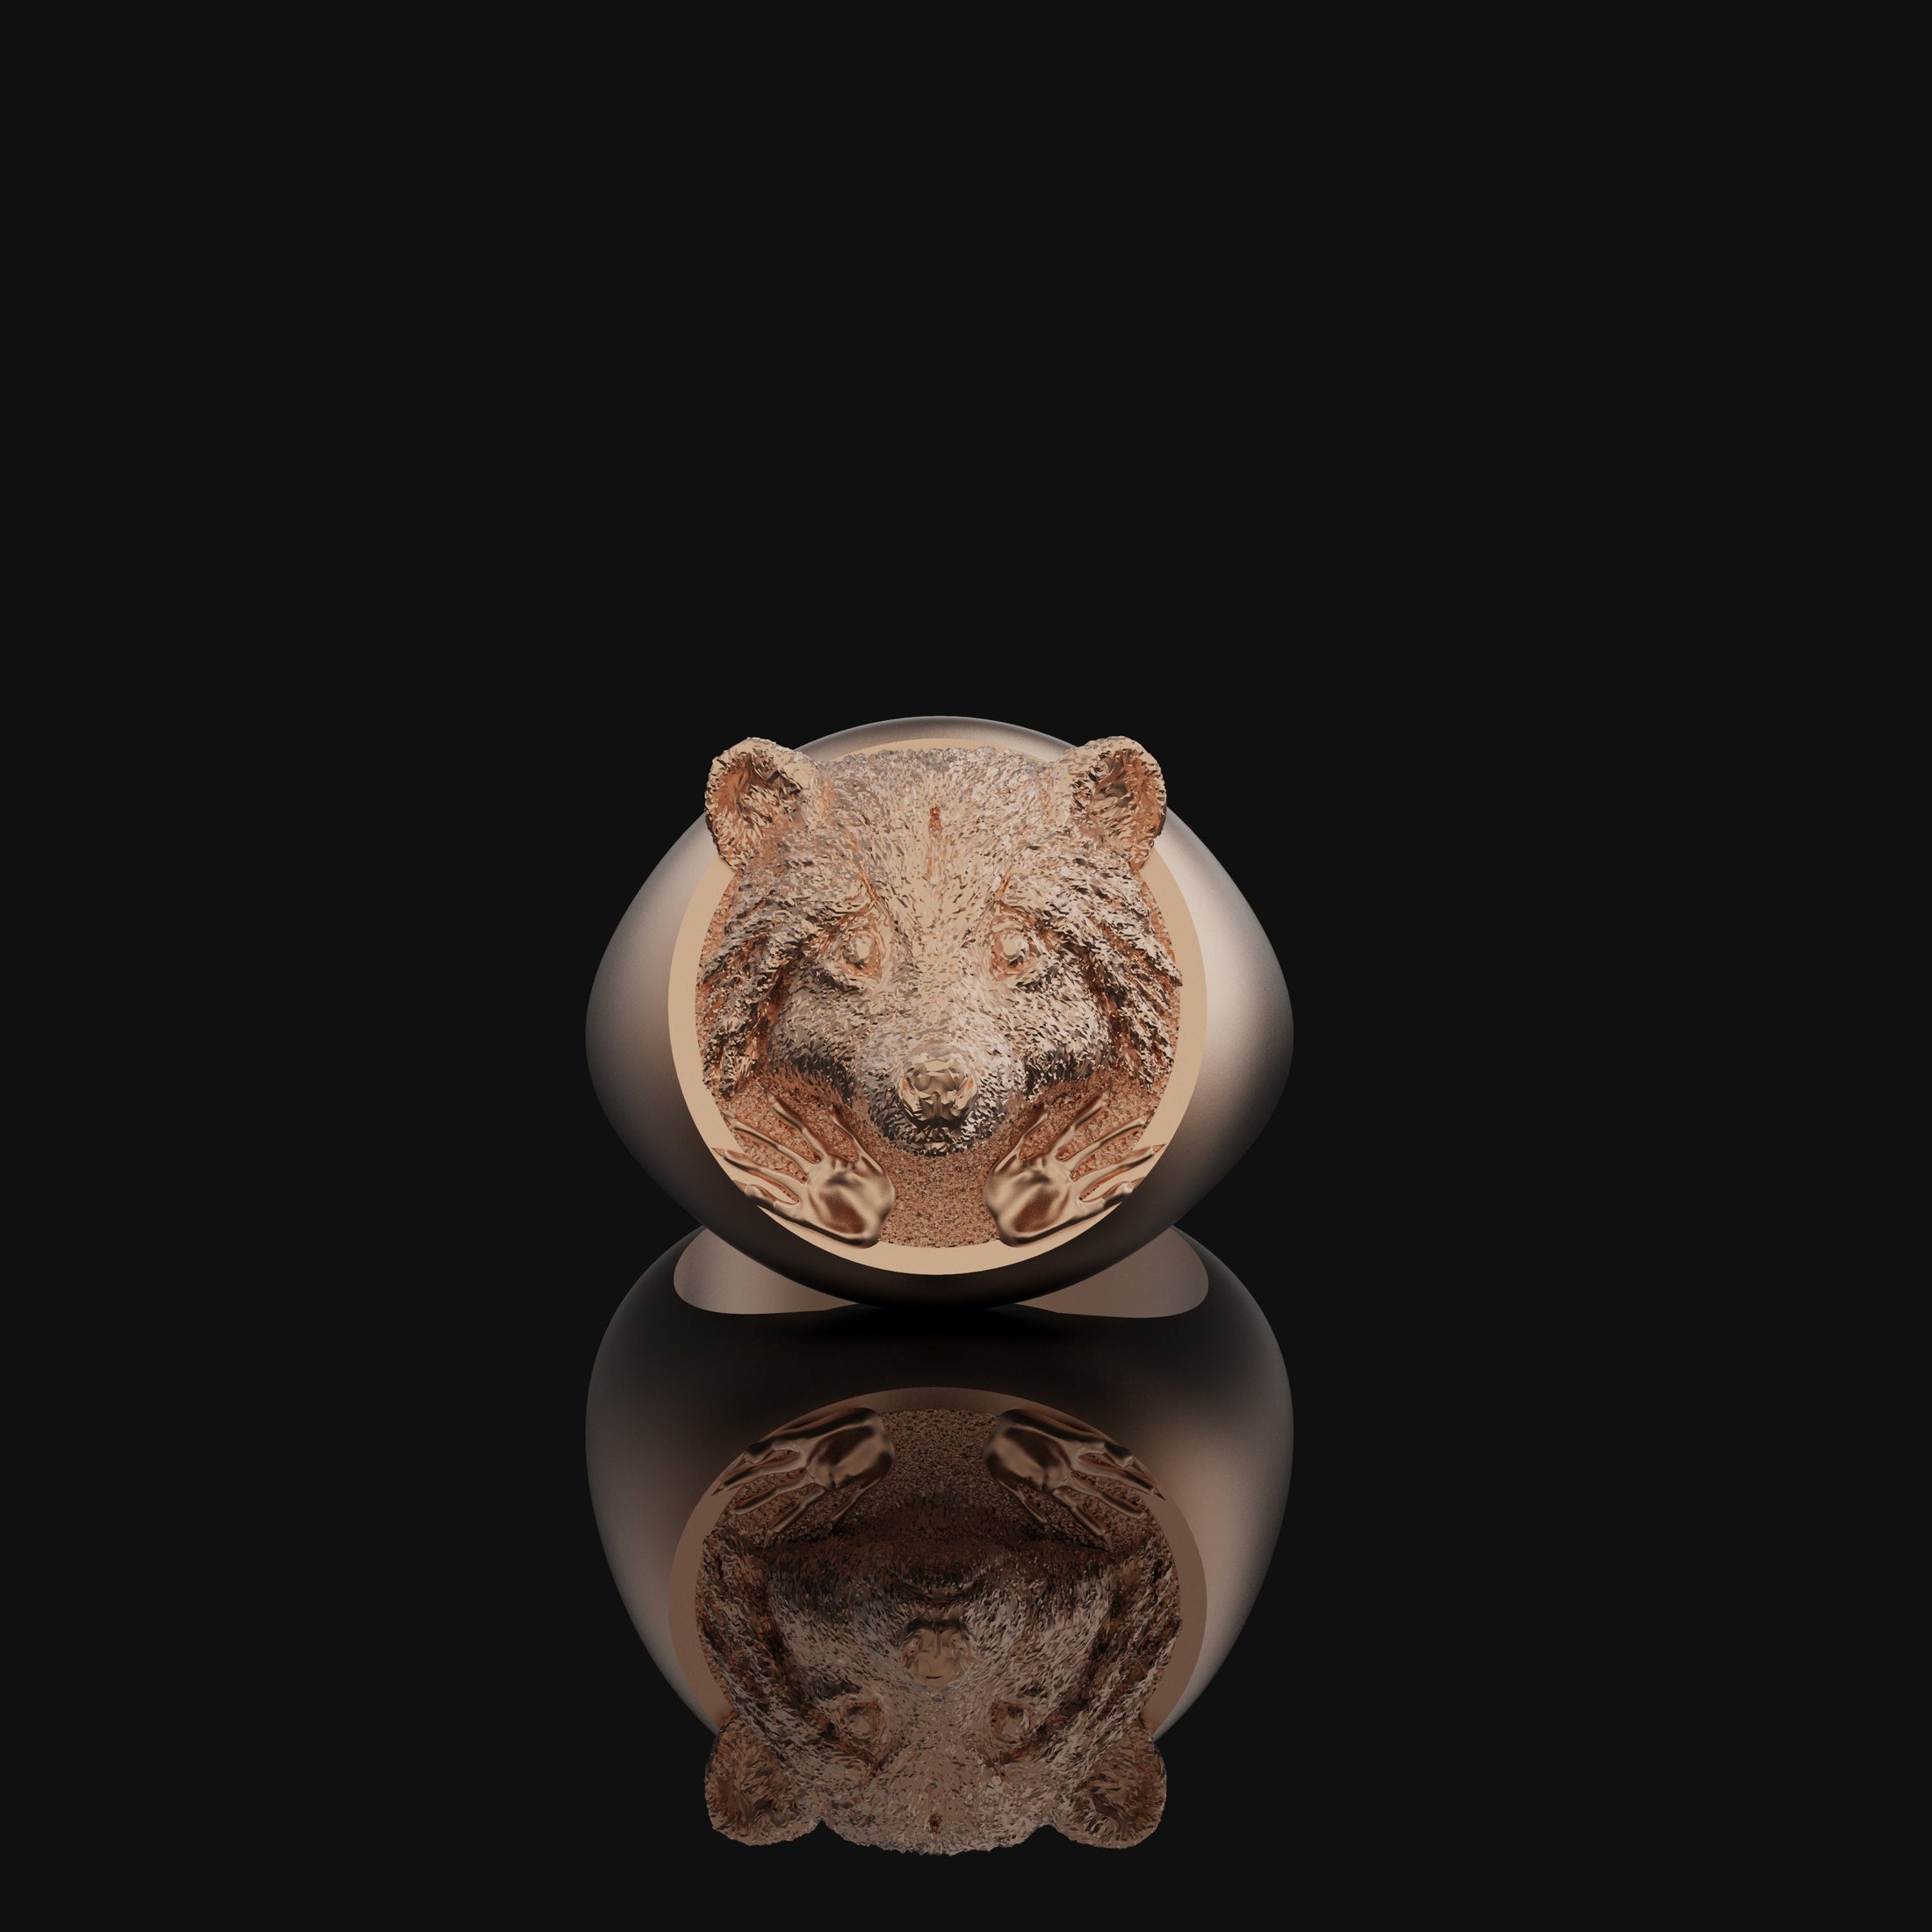 Silver Raccoon Ring, Charming Animal Jewelry, Unique Band for Nature Lovers, Playful Raccoon Design, Perfect Gift Idea Rose Gold Finish